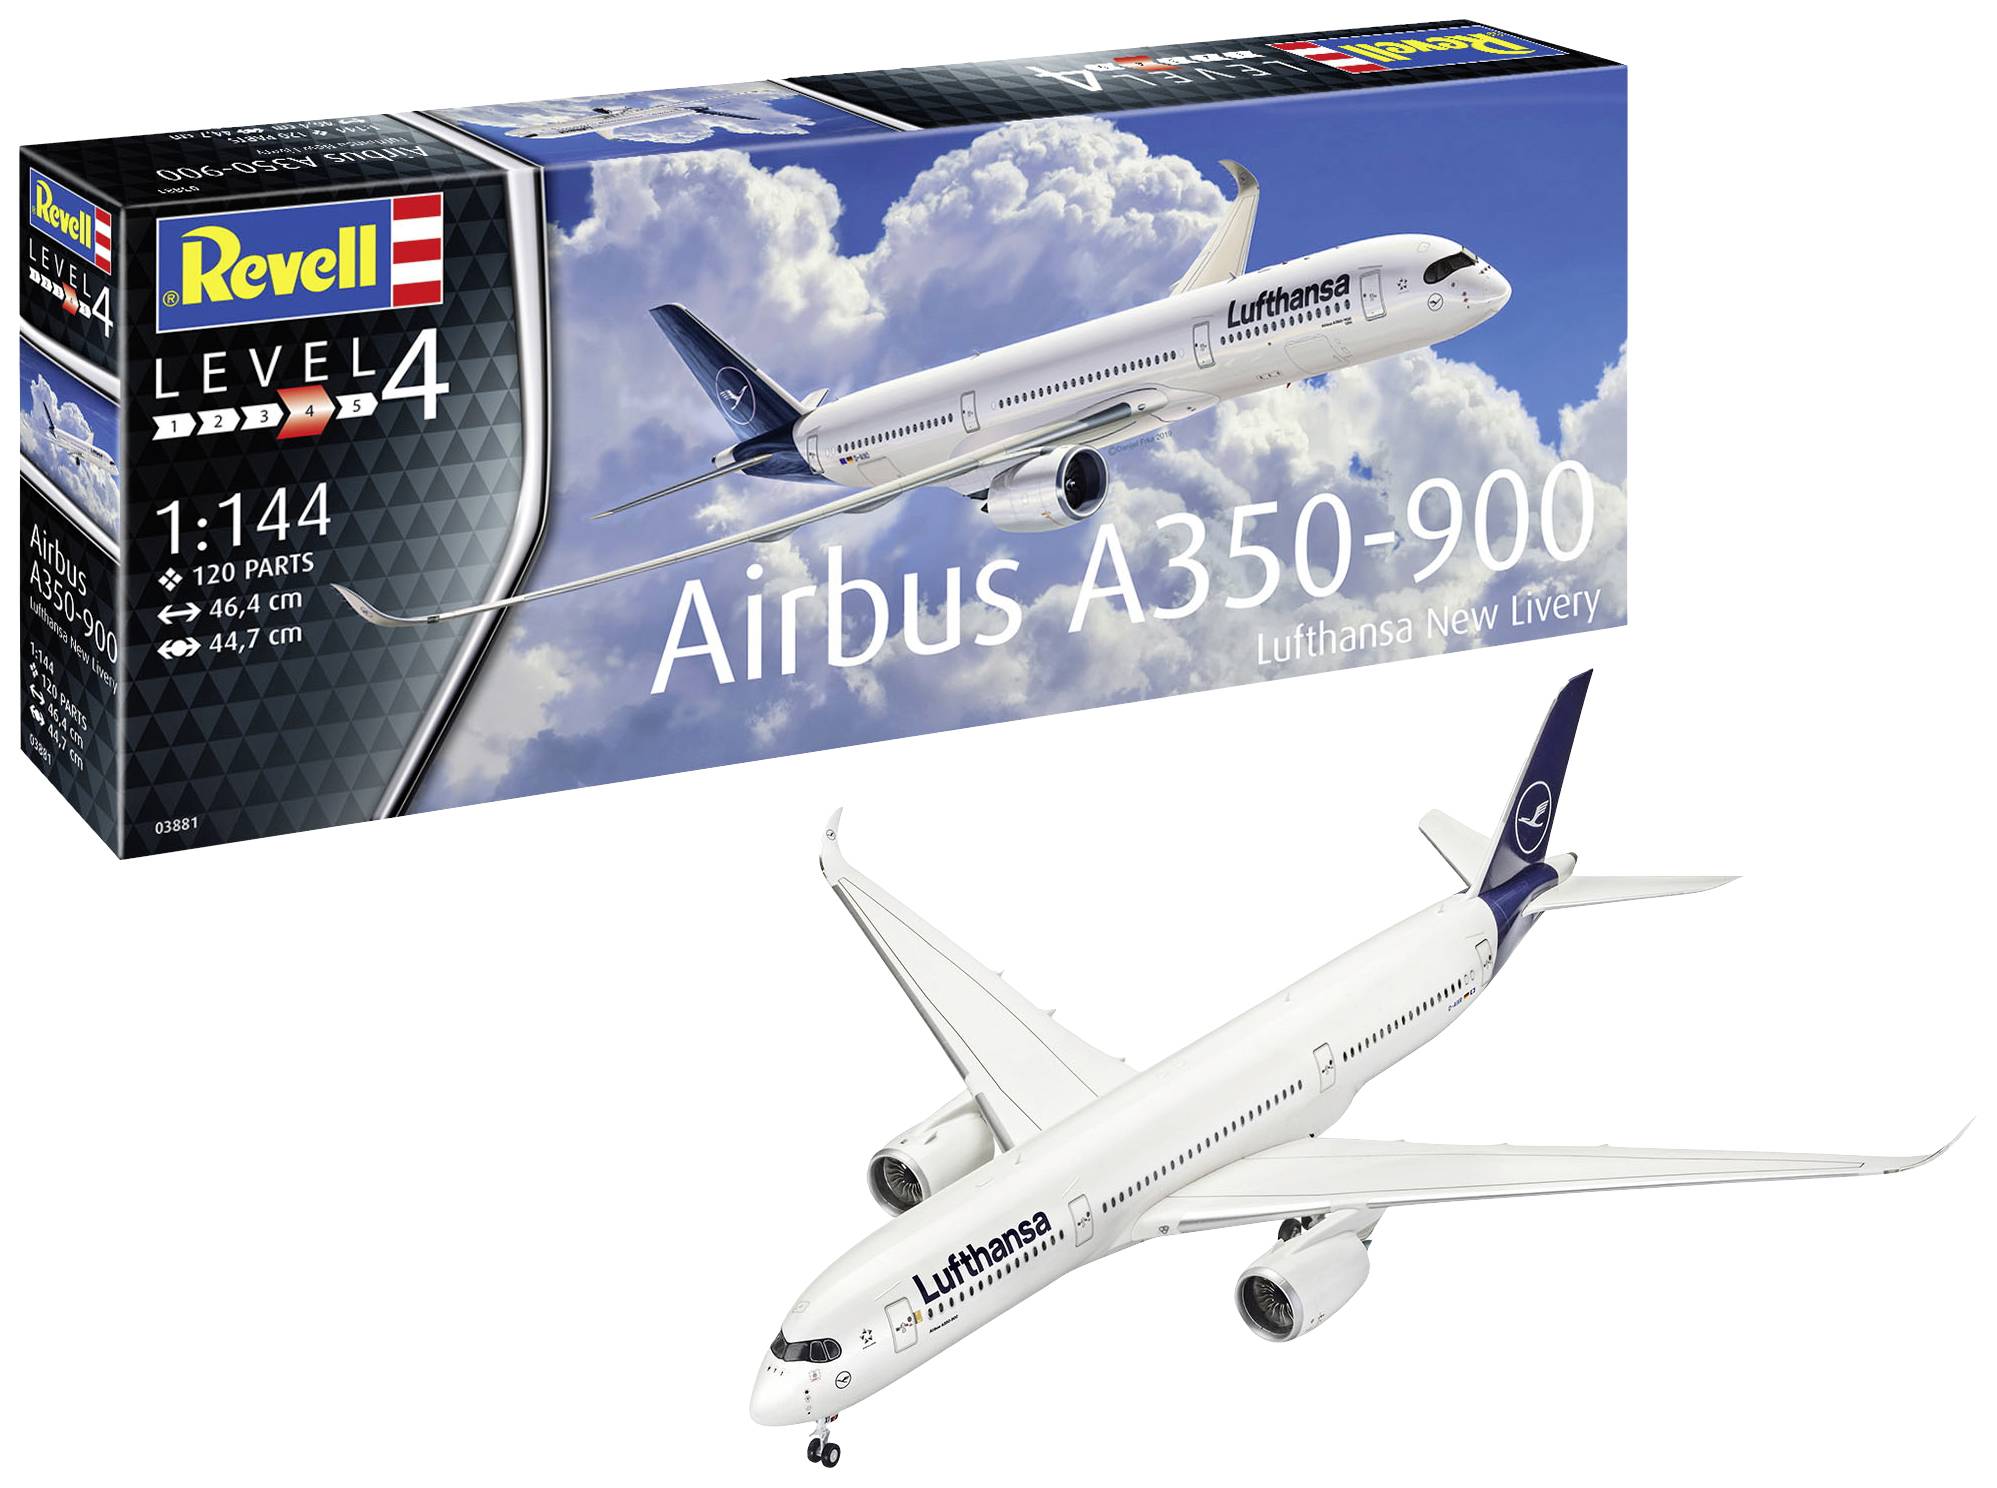 Revell 03881 Airbus A350-900 Lufthansa New Livery Model aircraft ...